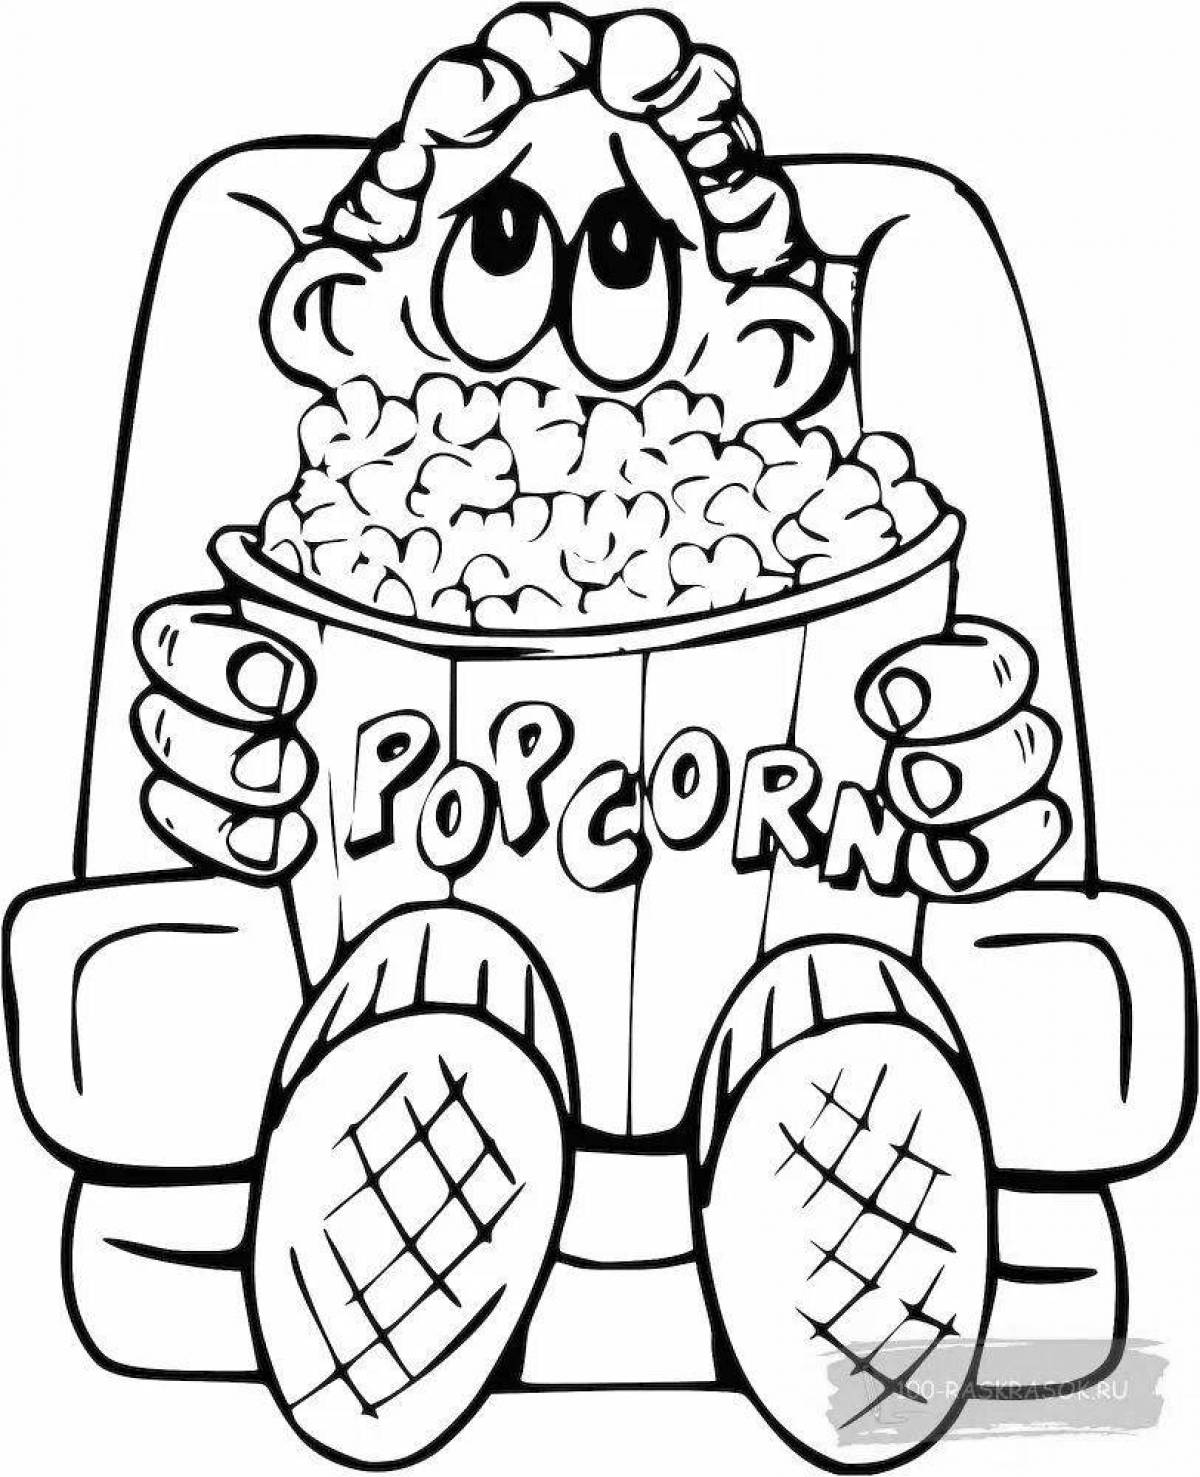 Cute popcorn coloring book for kids